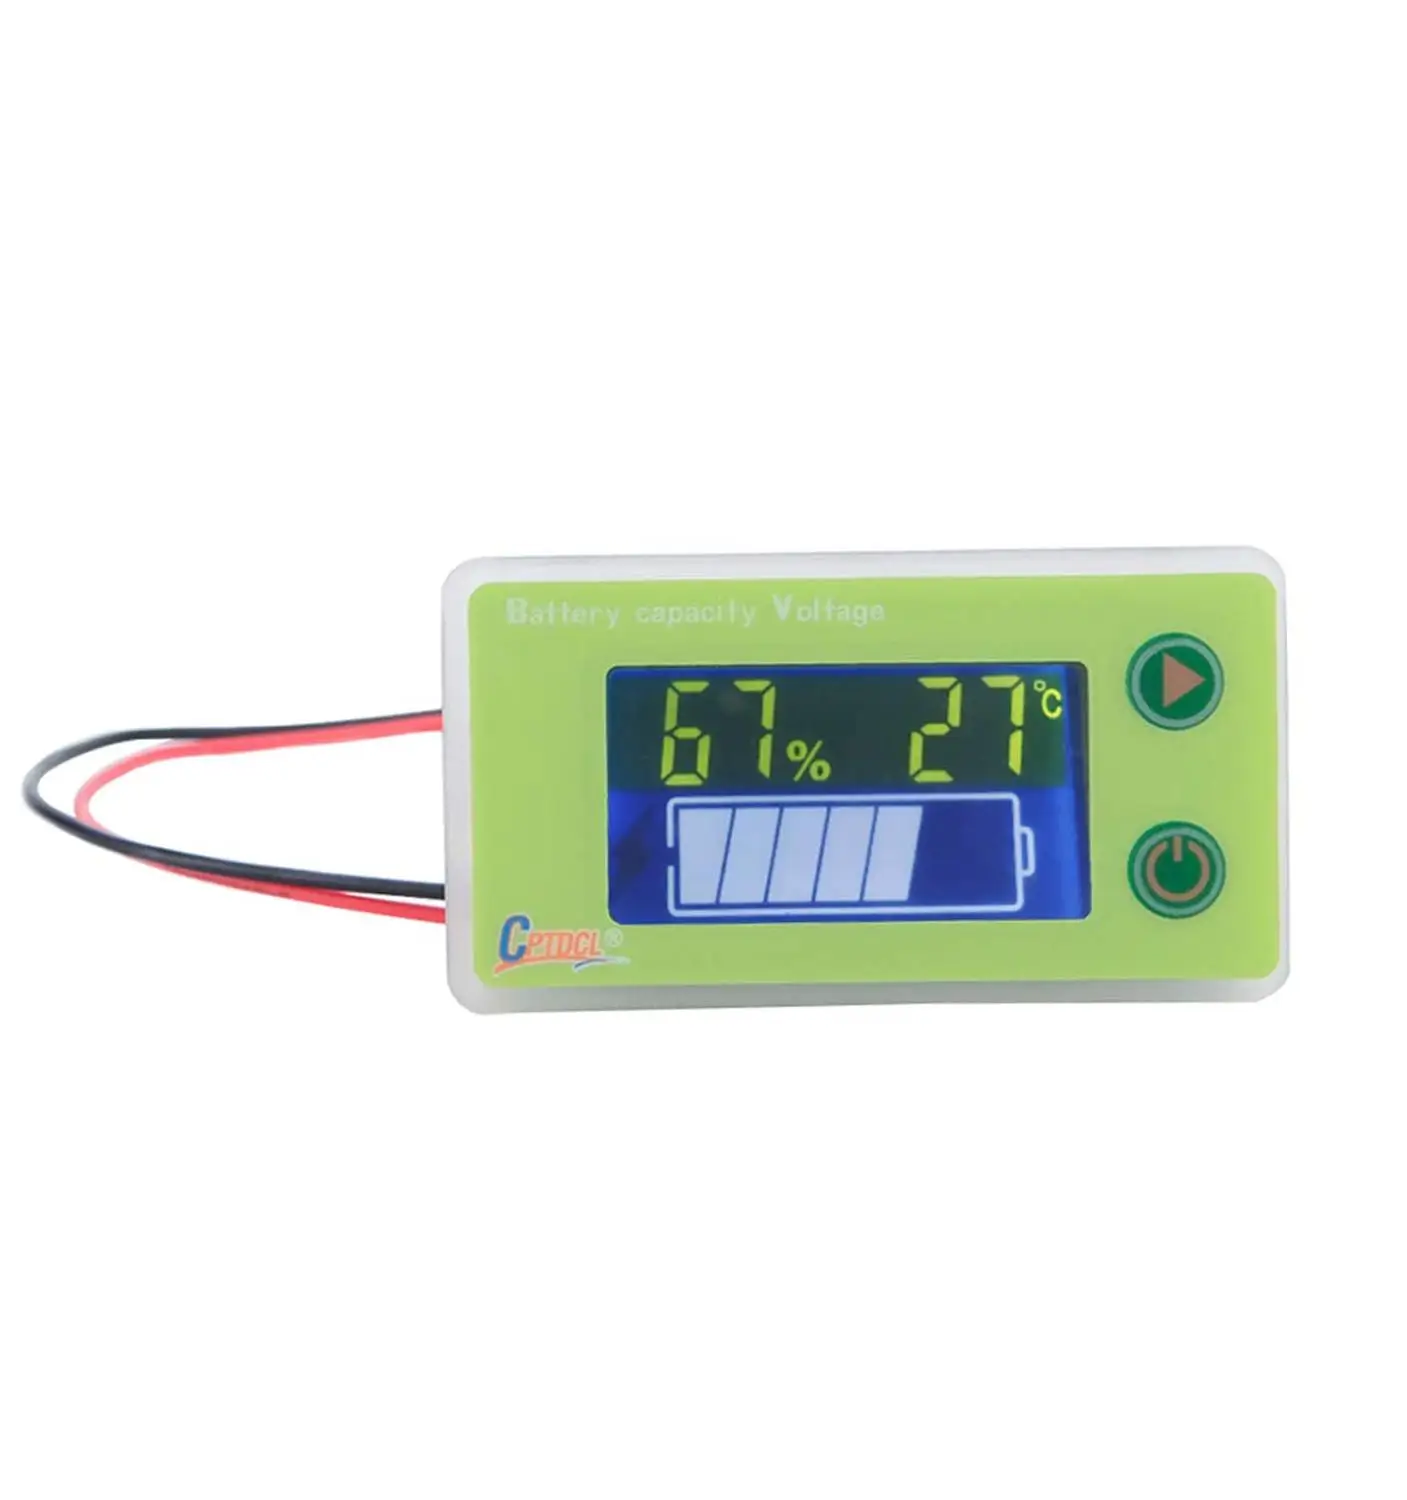 CPTDCL Multifunction 12V LCD Lead Acid Battery Capacity Meter Voltmeter Temperature Display Battery Fuel Gauge Indicator Voltage Monitor 